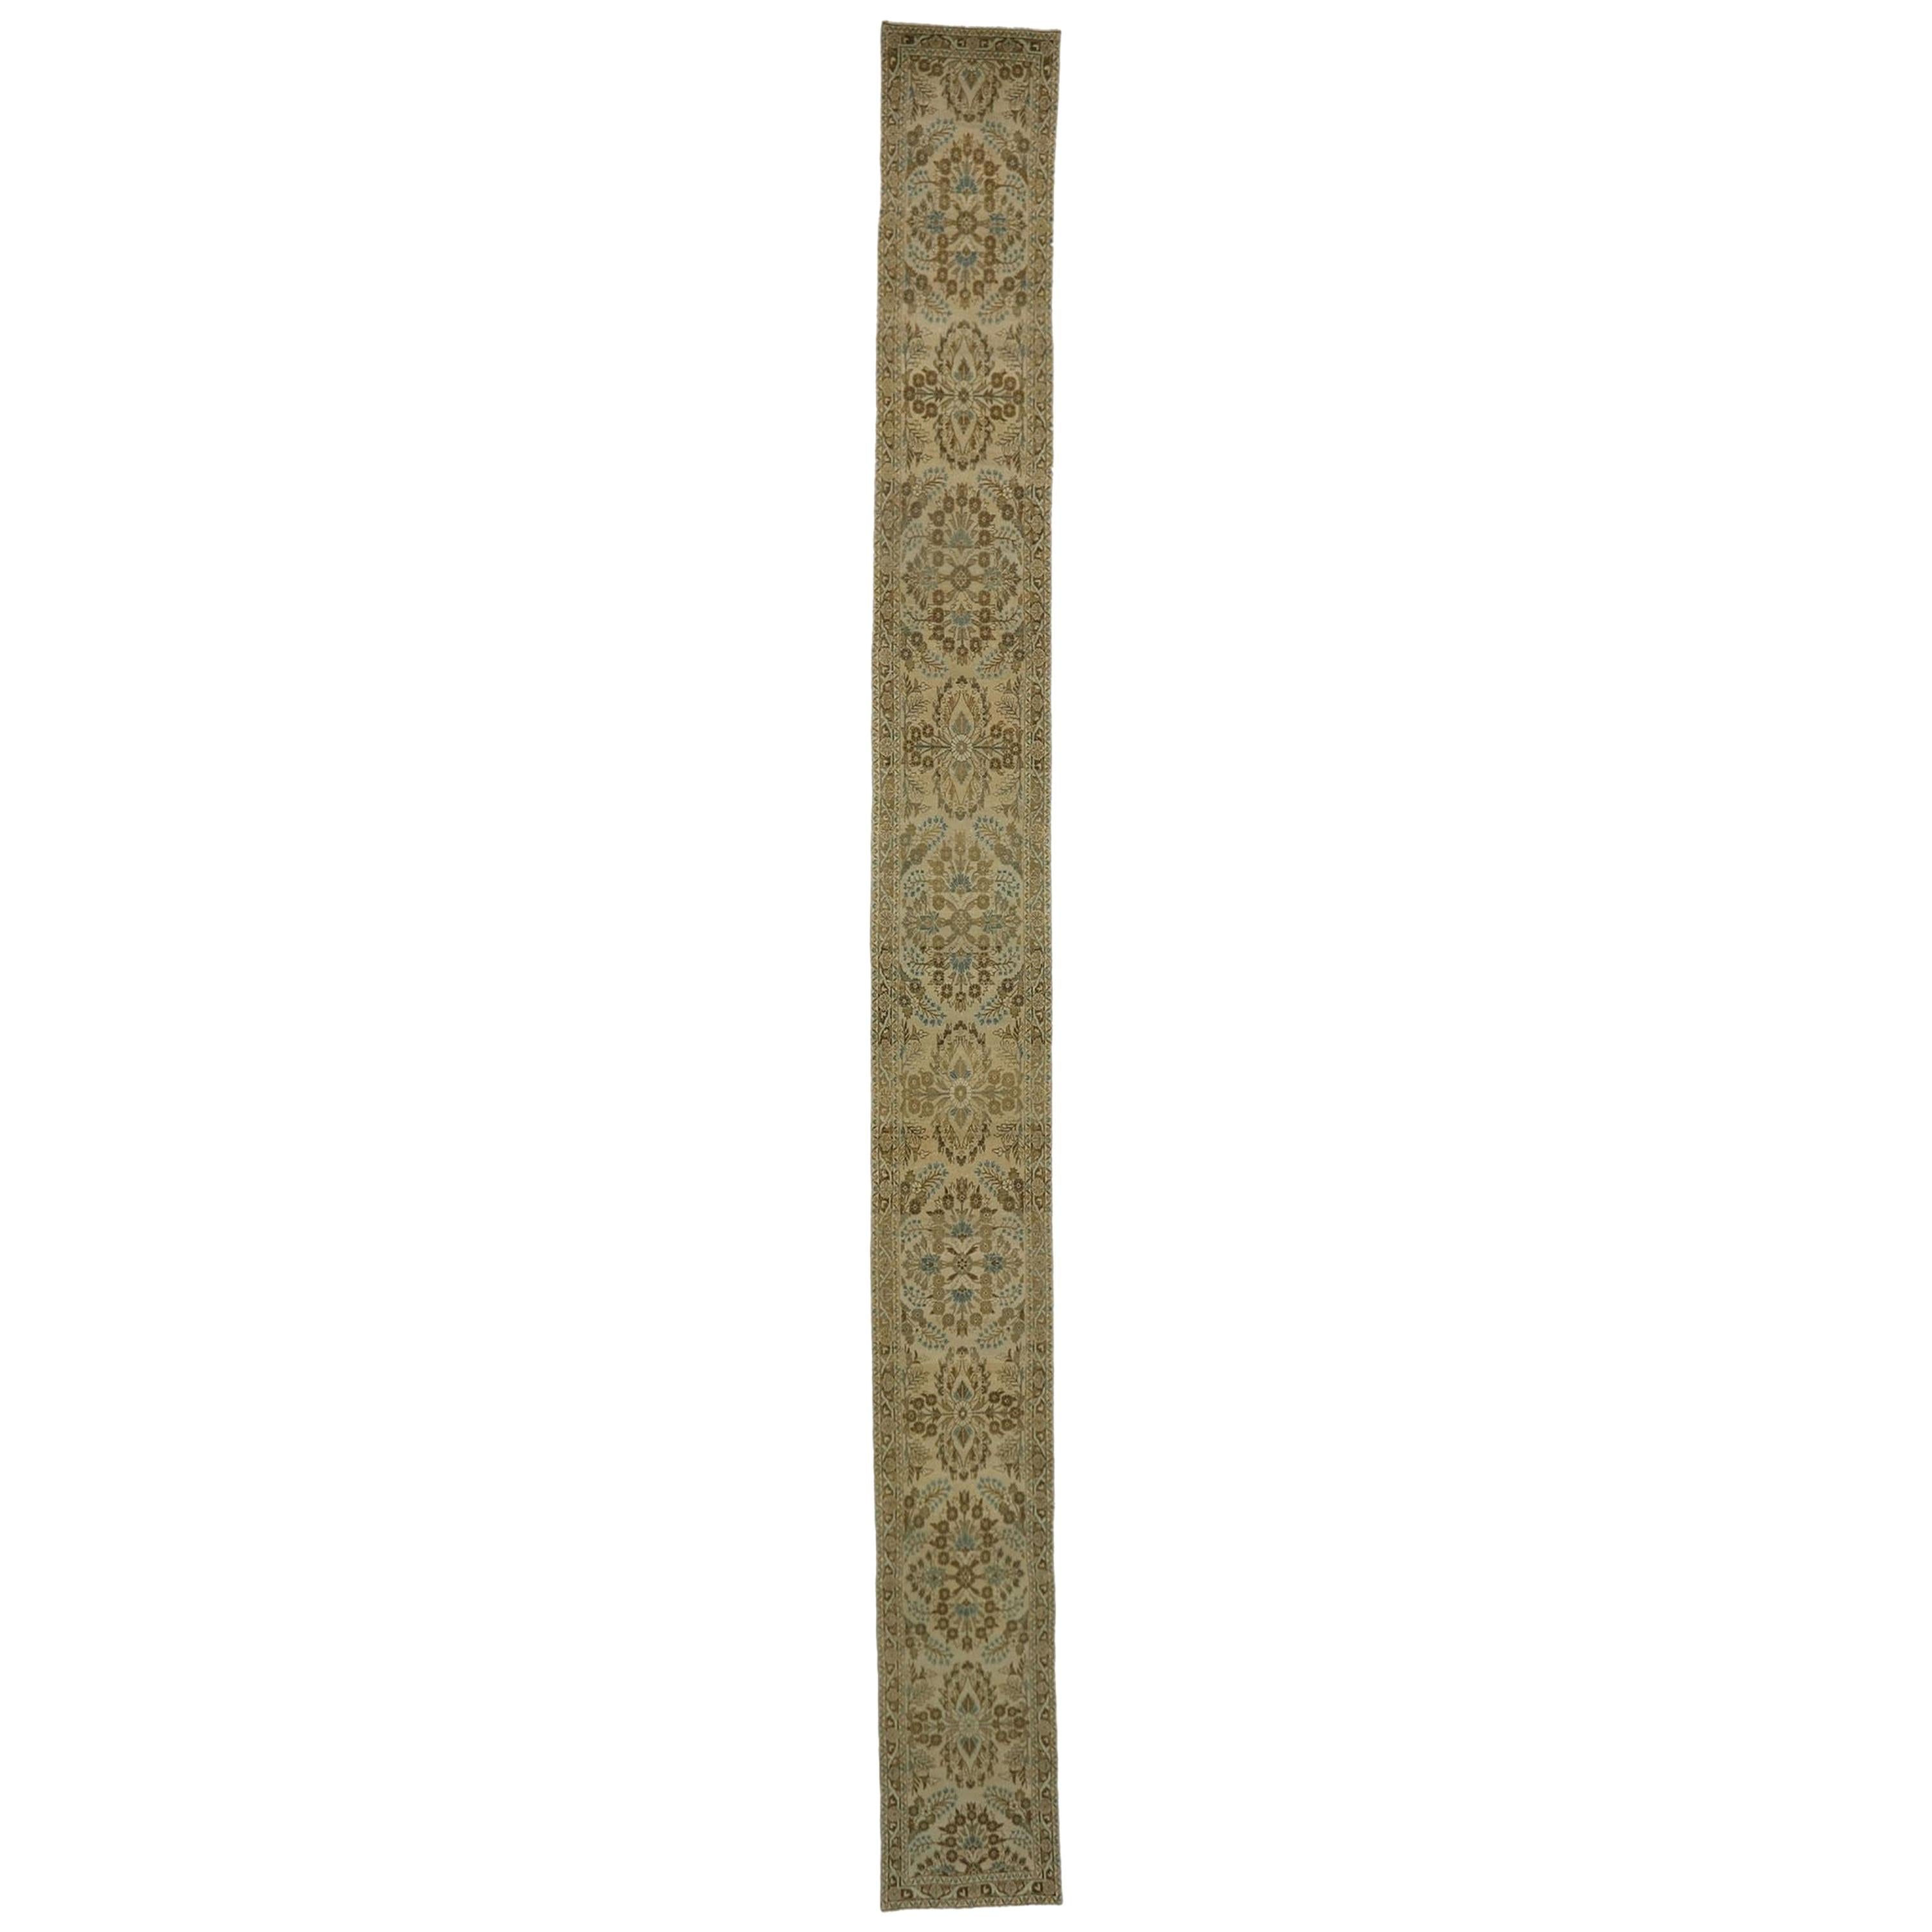 Vintage Persian Hamadan Runner with Amish Shaker Style For Sale